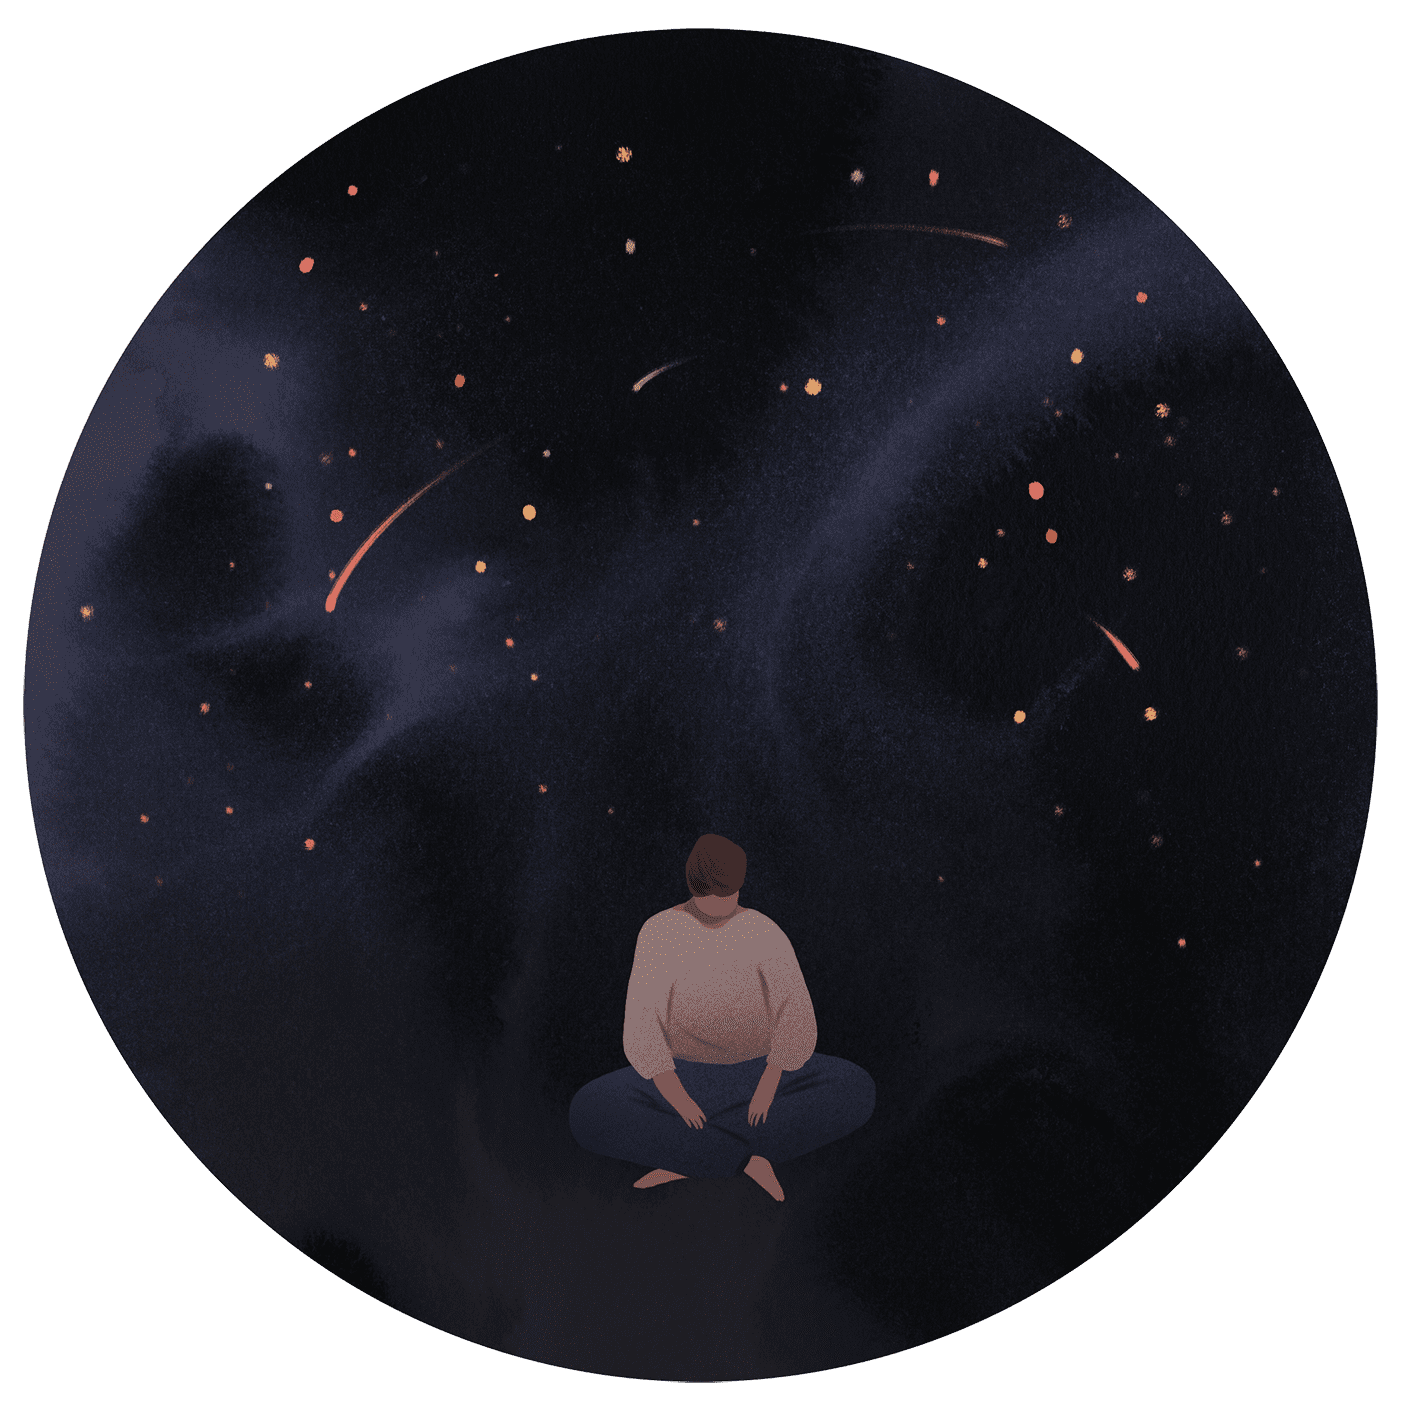 An illustration of a person sitting cross-legged under the night sky.